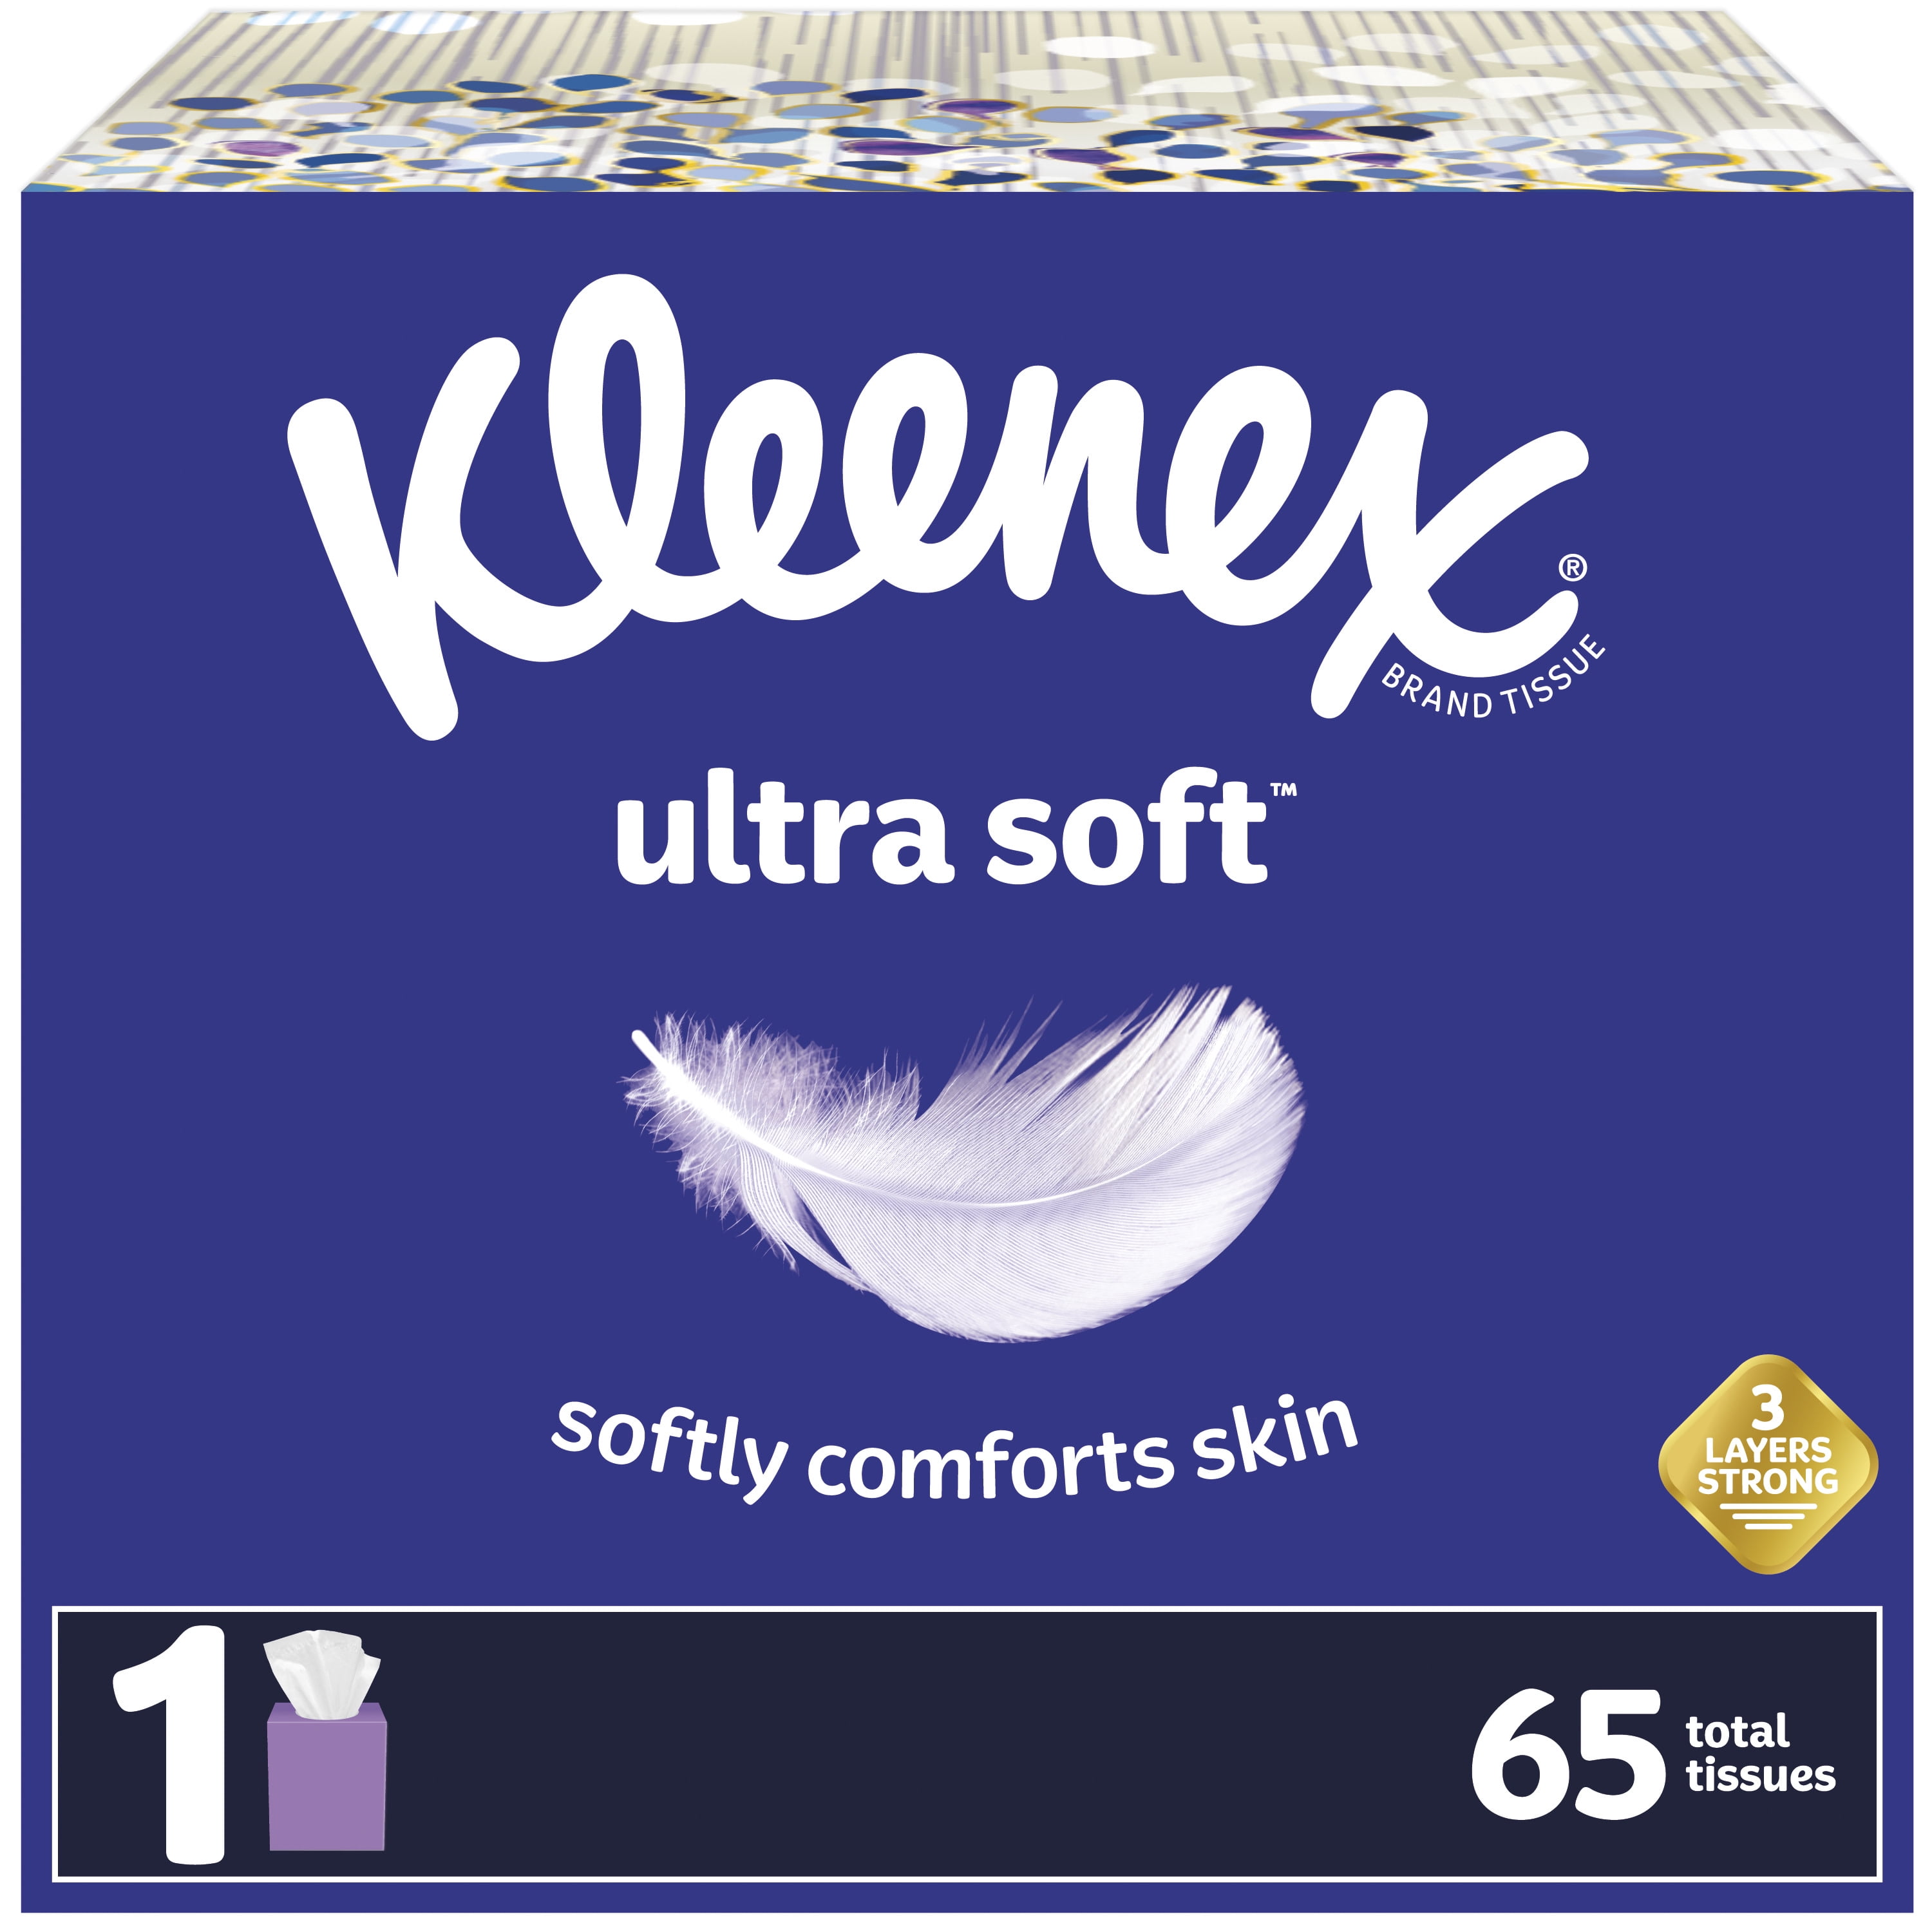 Pack of 12 Tissue Boxes Kleenex Ultra Soft Facial Tissues 